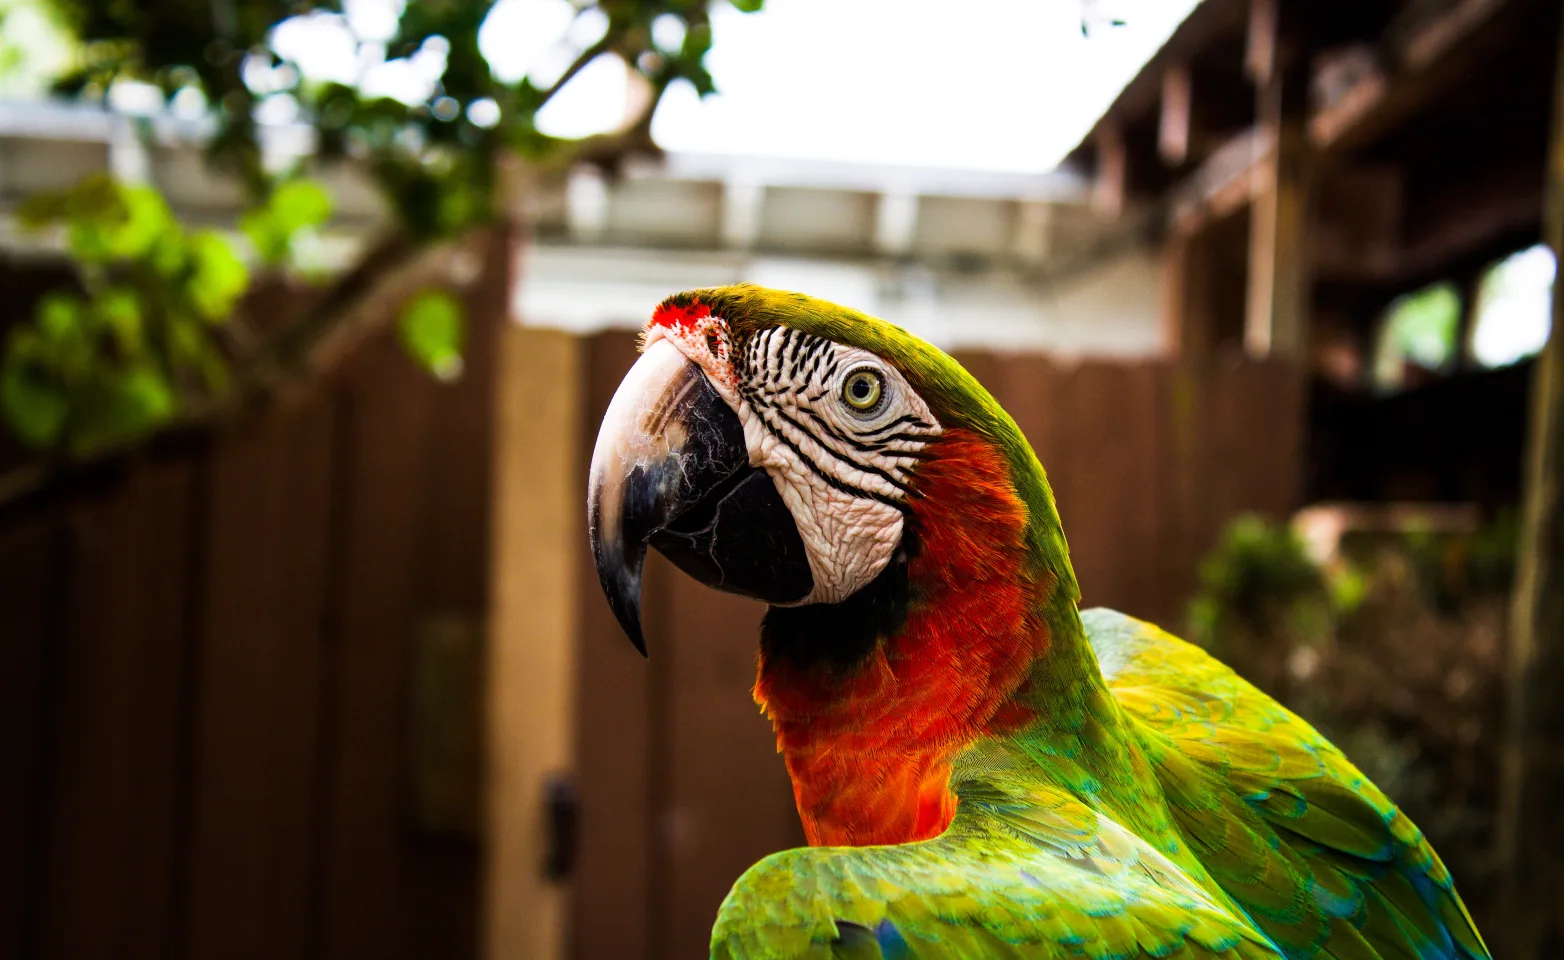 Parrot in a yard with a fence in the background